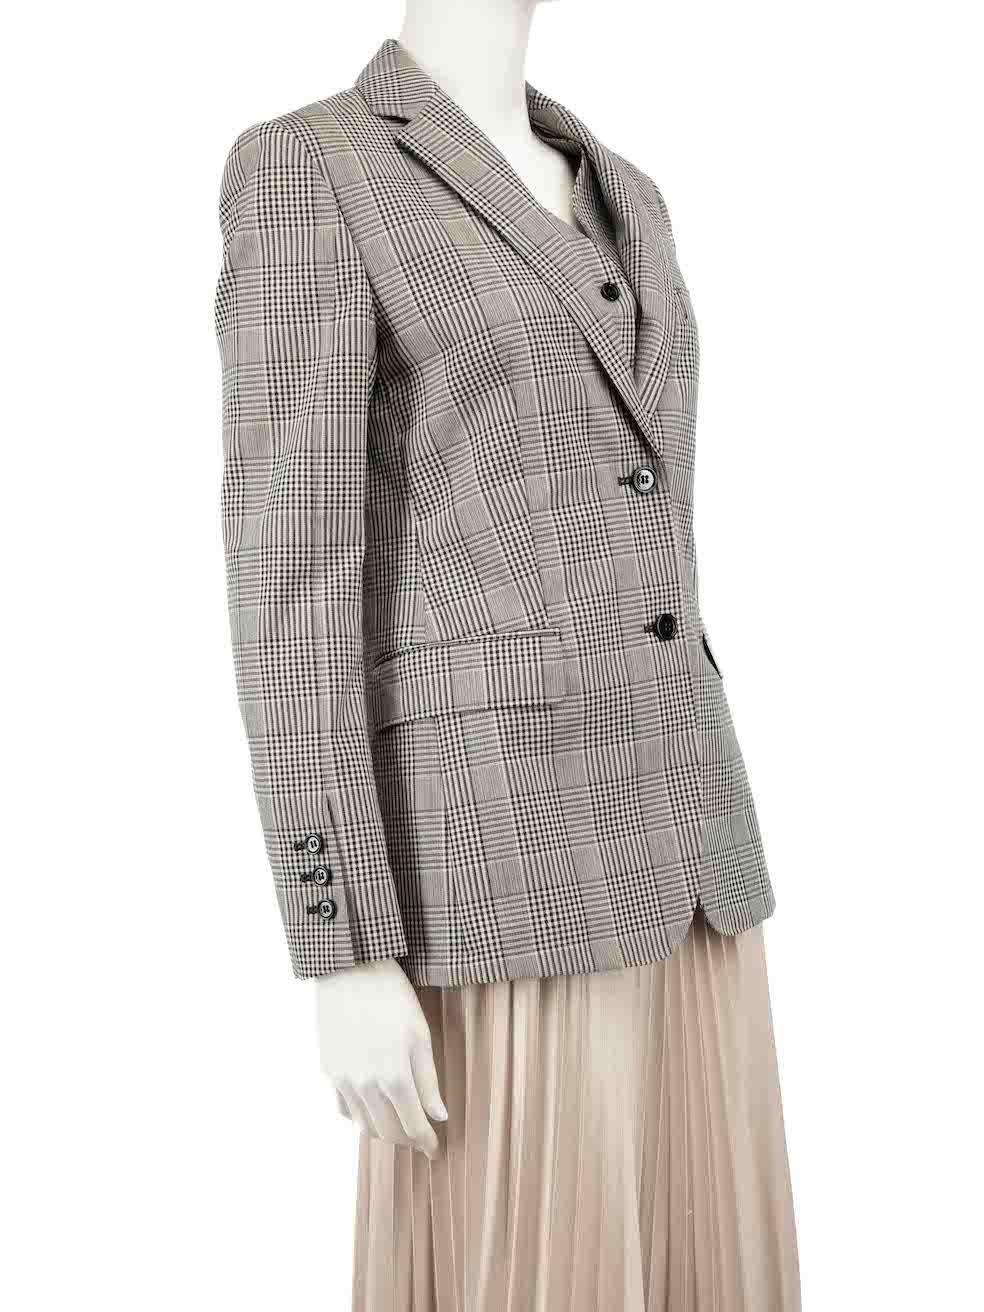 CONDITION is Never worn. No visible wear to blazer is evident on this new Burberry designer resale item.
 
 
 
 Details
 
 
 Grey
 
 Wool
 
 Tailored blazer
 
 Houndstooth checkered pattern
 
 Internal attached waistcoat
 
 Double layered button up